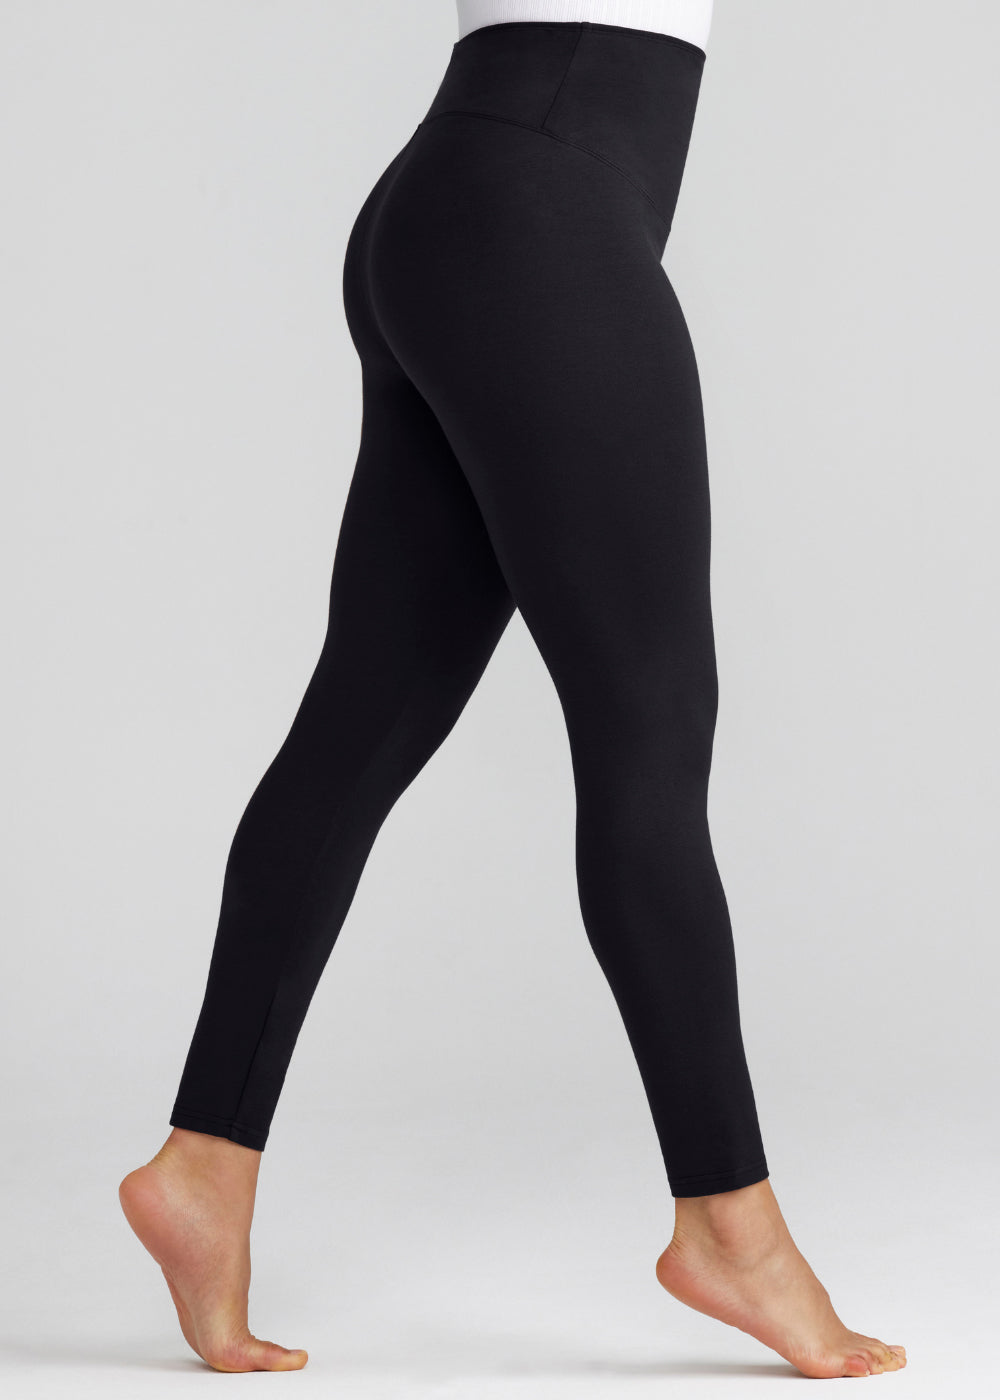 Ponte Shaping Legging from Yummie in Black  - 1